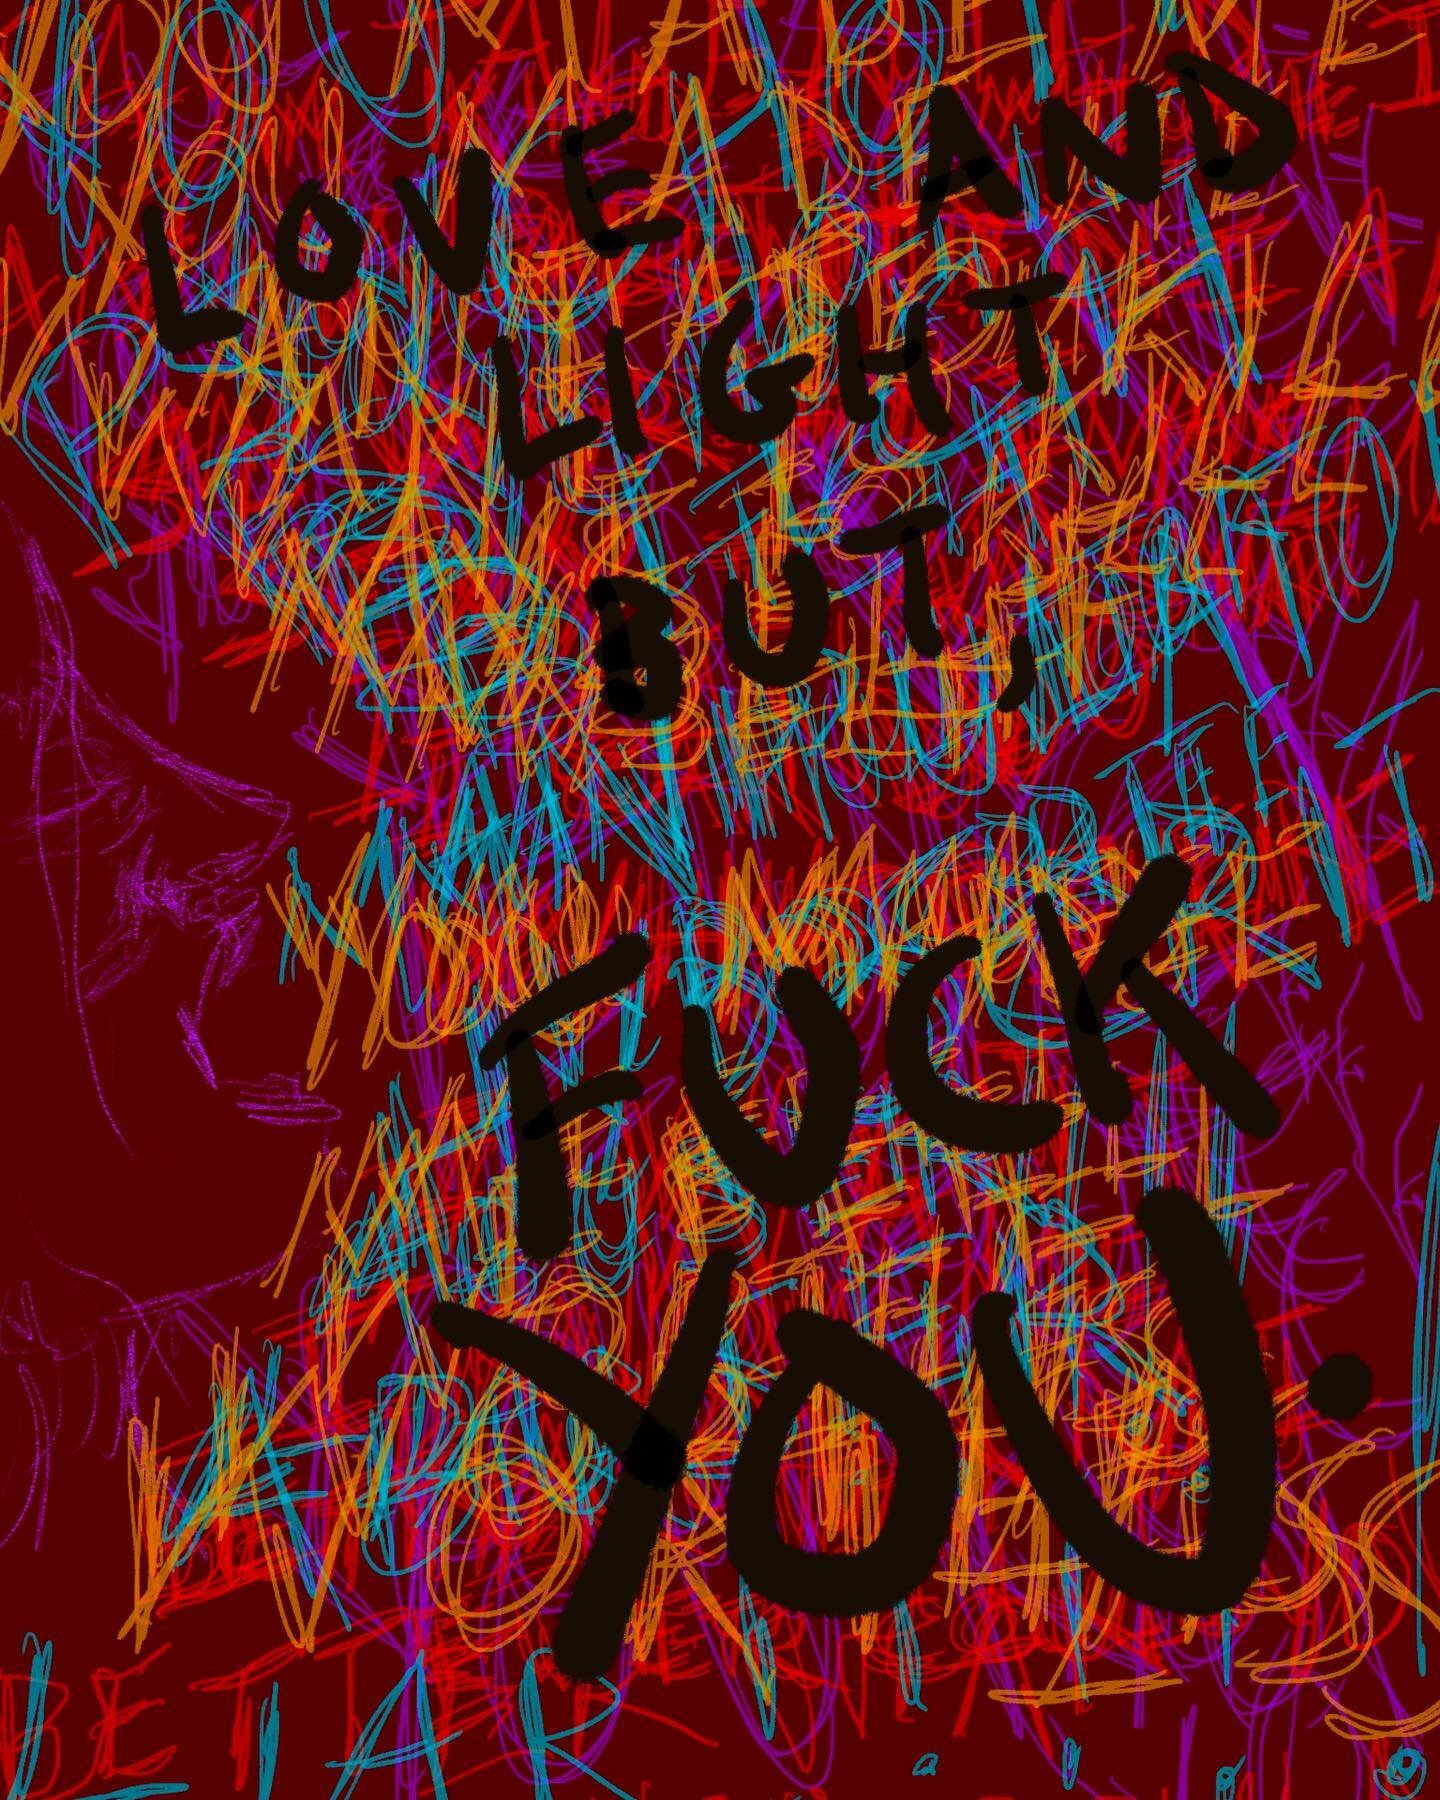 &ldquo;Love and Light but Fuck You&rdquo;, digital print 

Any and all sizes are available with starting price of $15 💸

Can be mailed directly to you or pick-up available in NYC 🗽

DM for custom requests! 🖌🖼

Thank you for supporting my work! :)